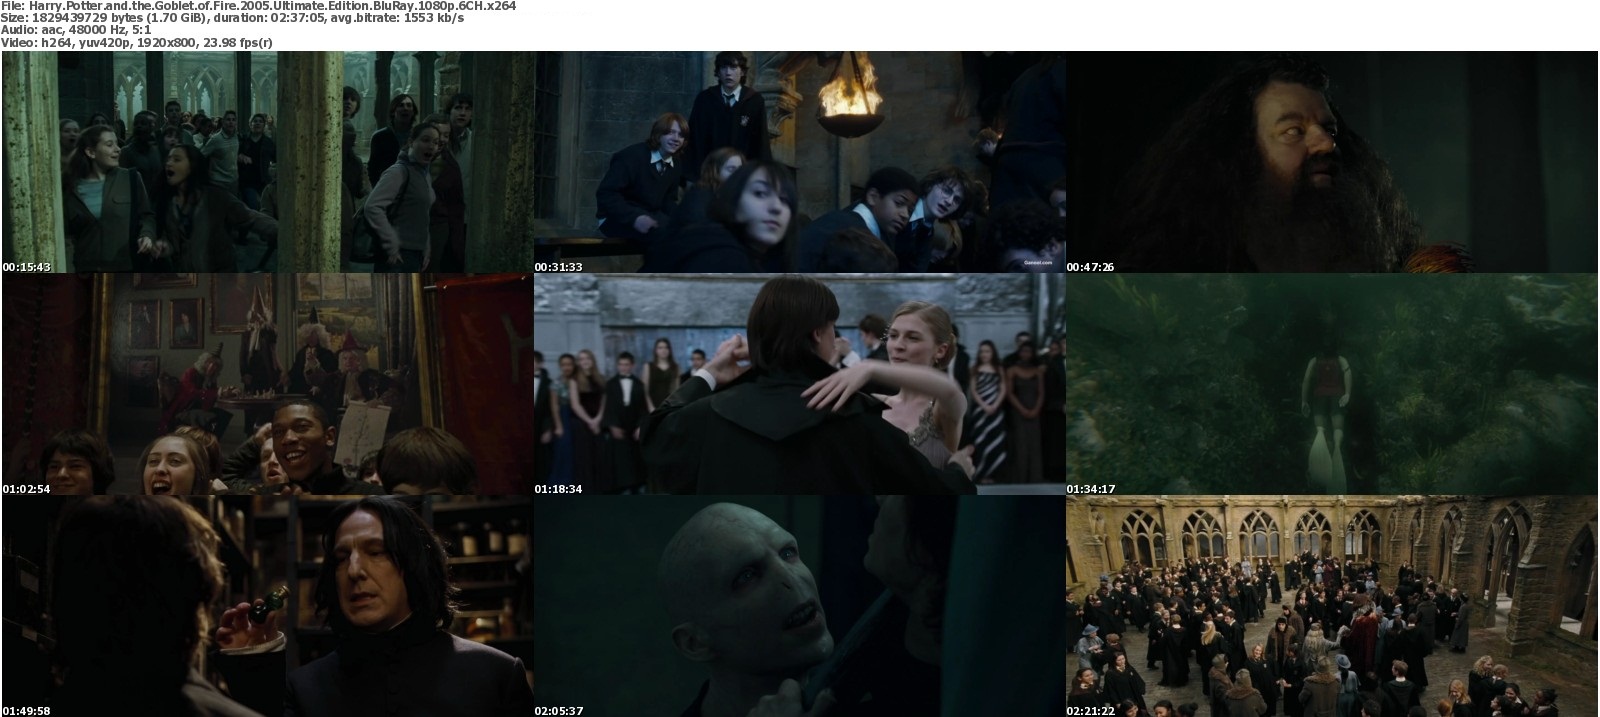 harry potter and the goblet of fire download in hindi 1080p